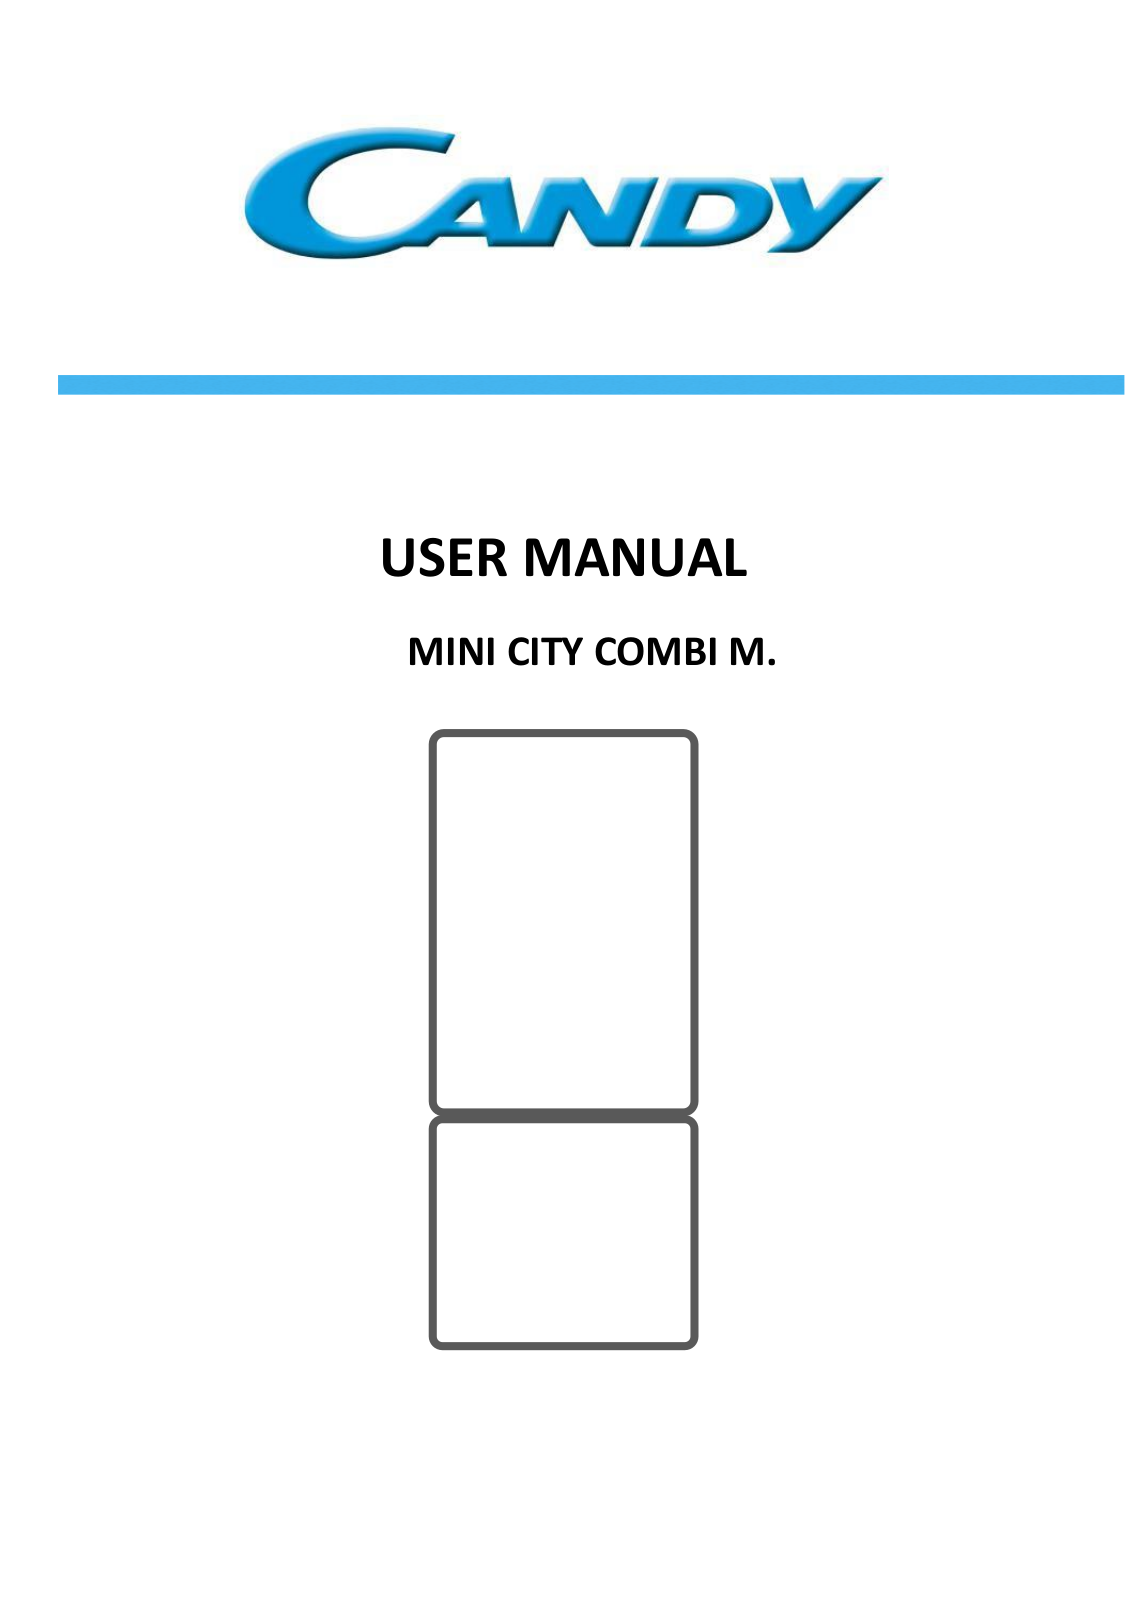 Candy CMCL4144SN, CMCL4144WN User Manual